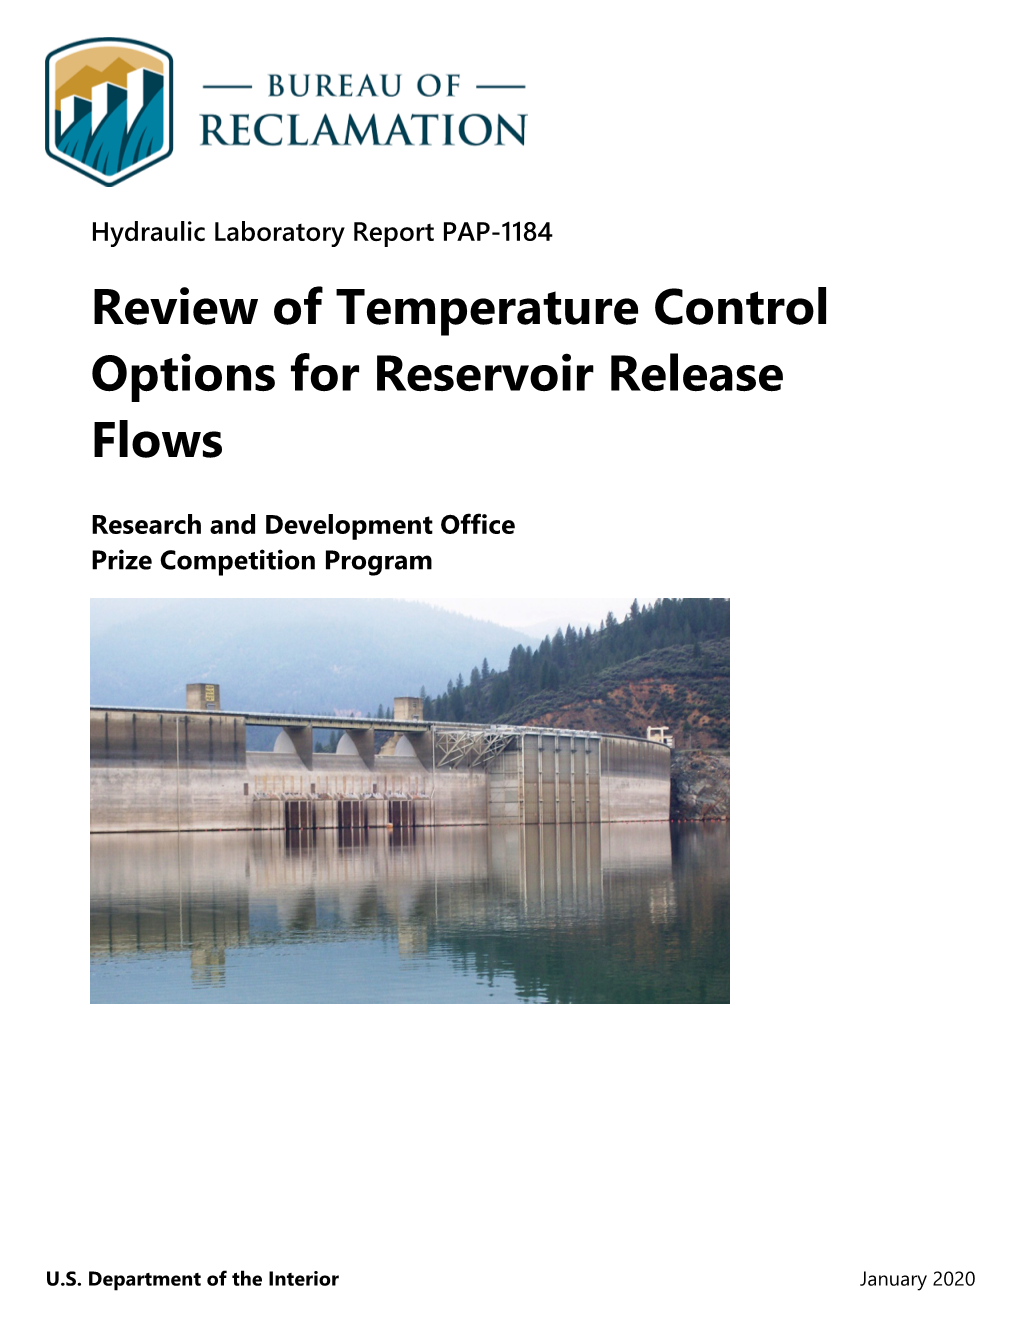 Review of Temperature Control Options for Reservoir Release Flows